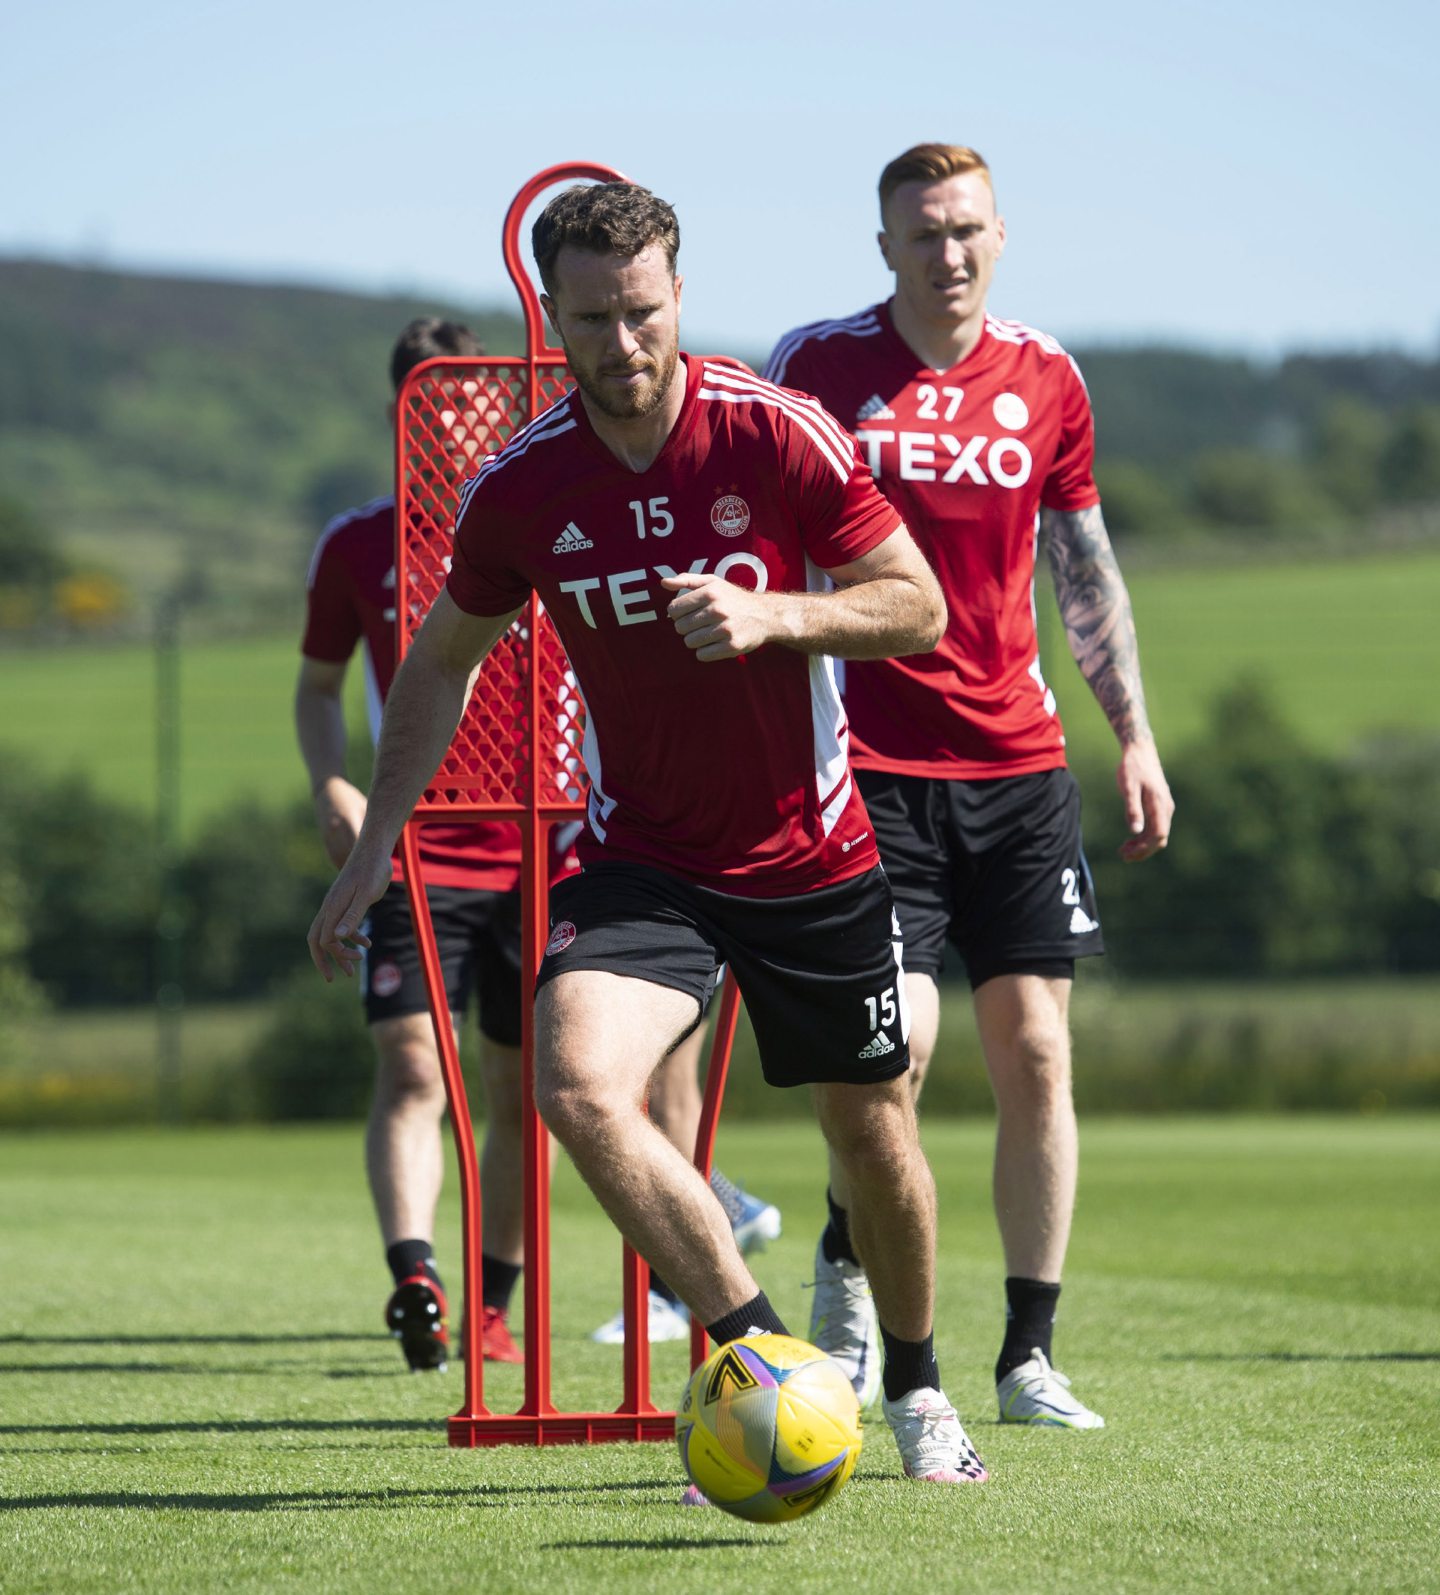 Marley Watkins dribbles with the ball during a pre-season training session.